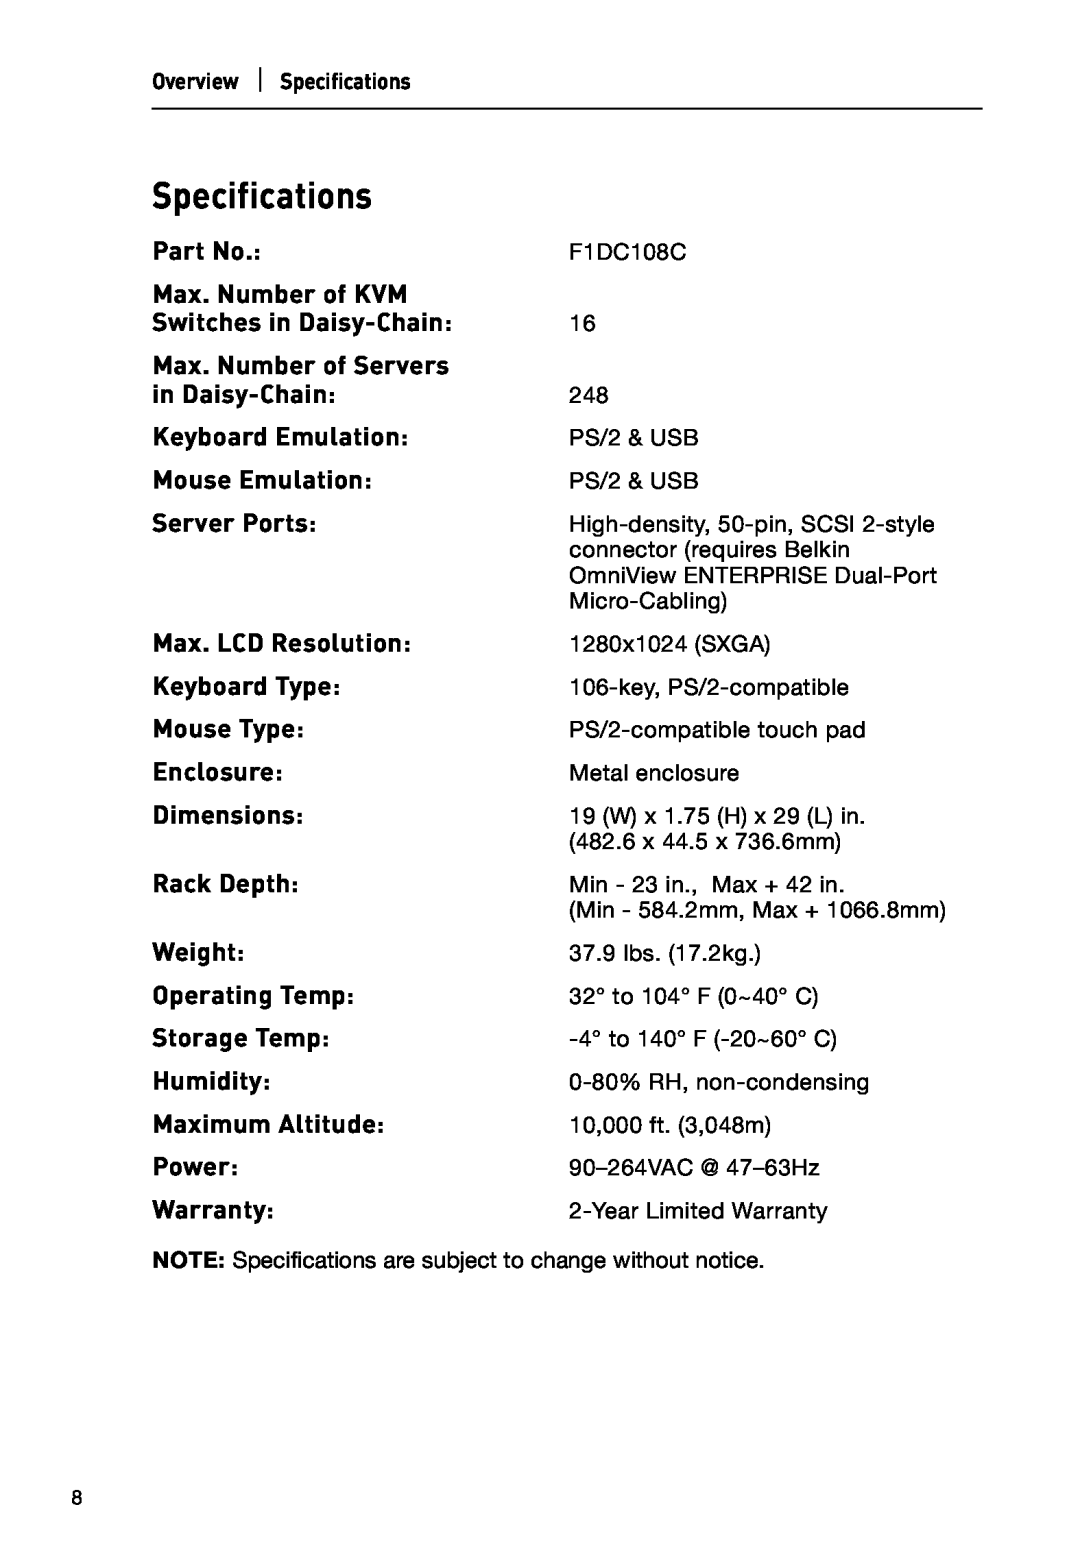 Belkin P74696 Specifications, Max. Number of KVM, Switches in Daisy-Chain, Max. Number of Servers, Keyboard Emulation 